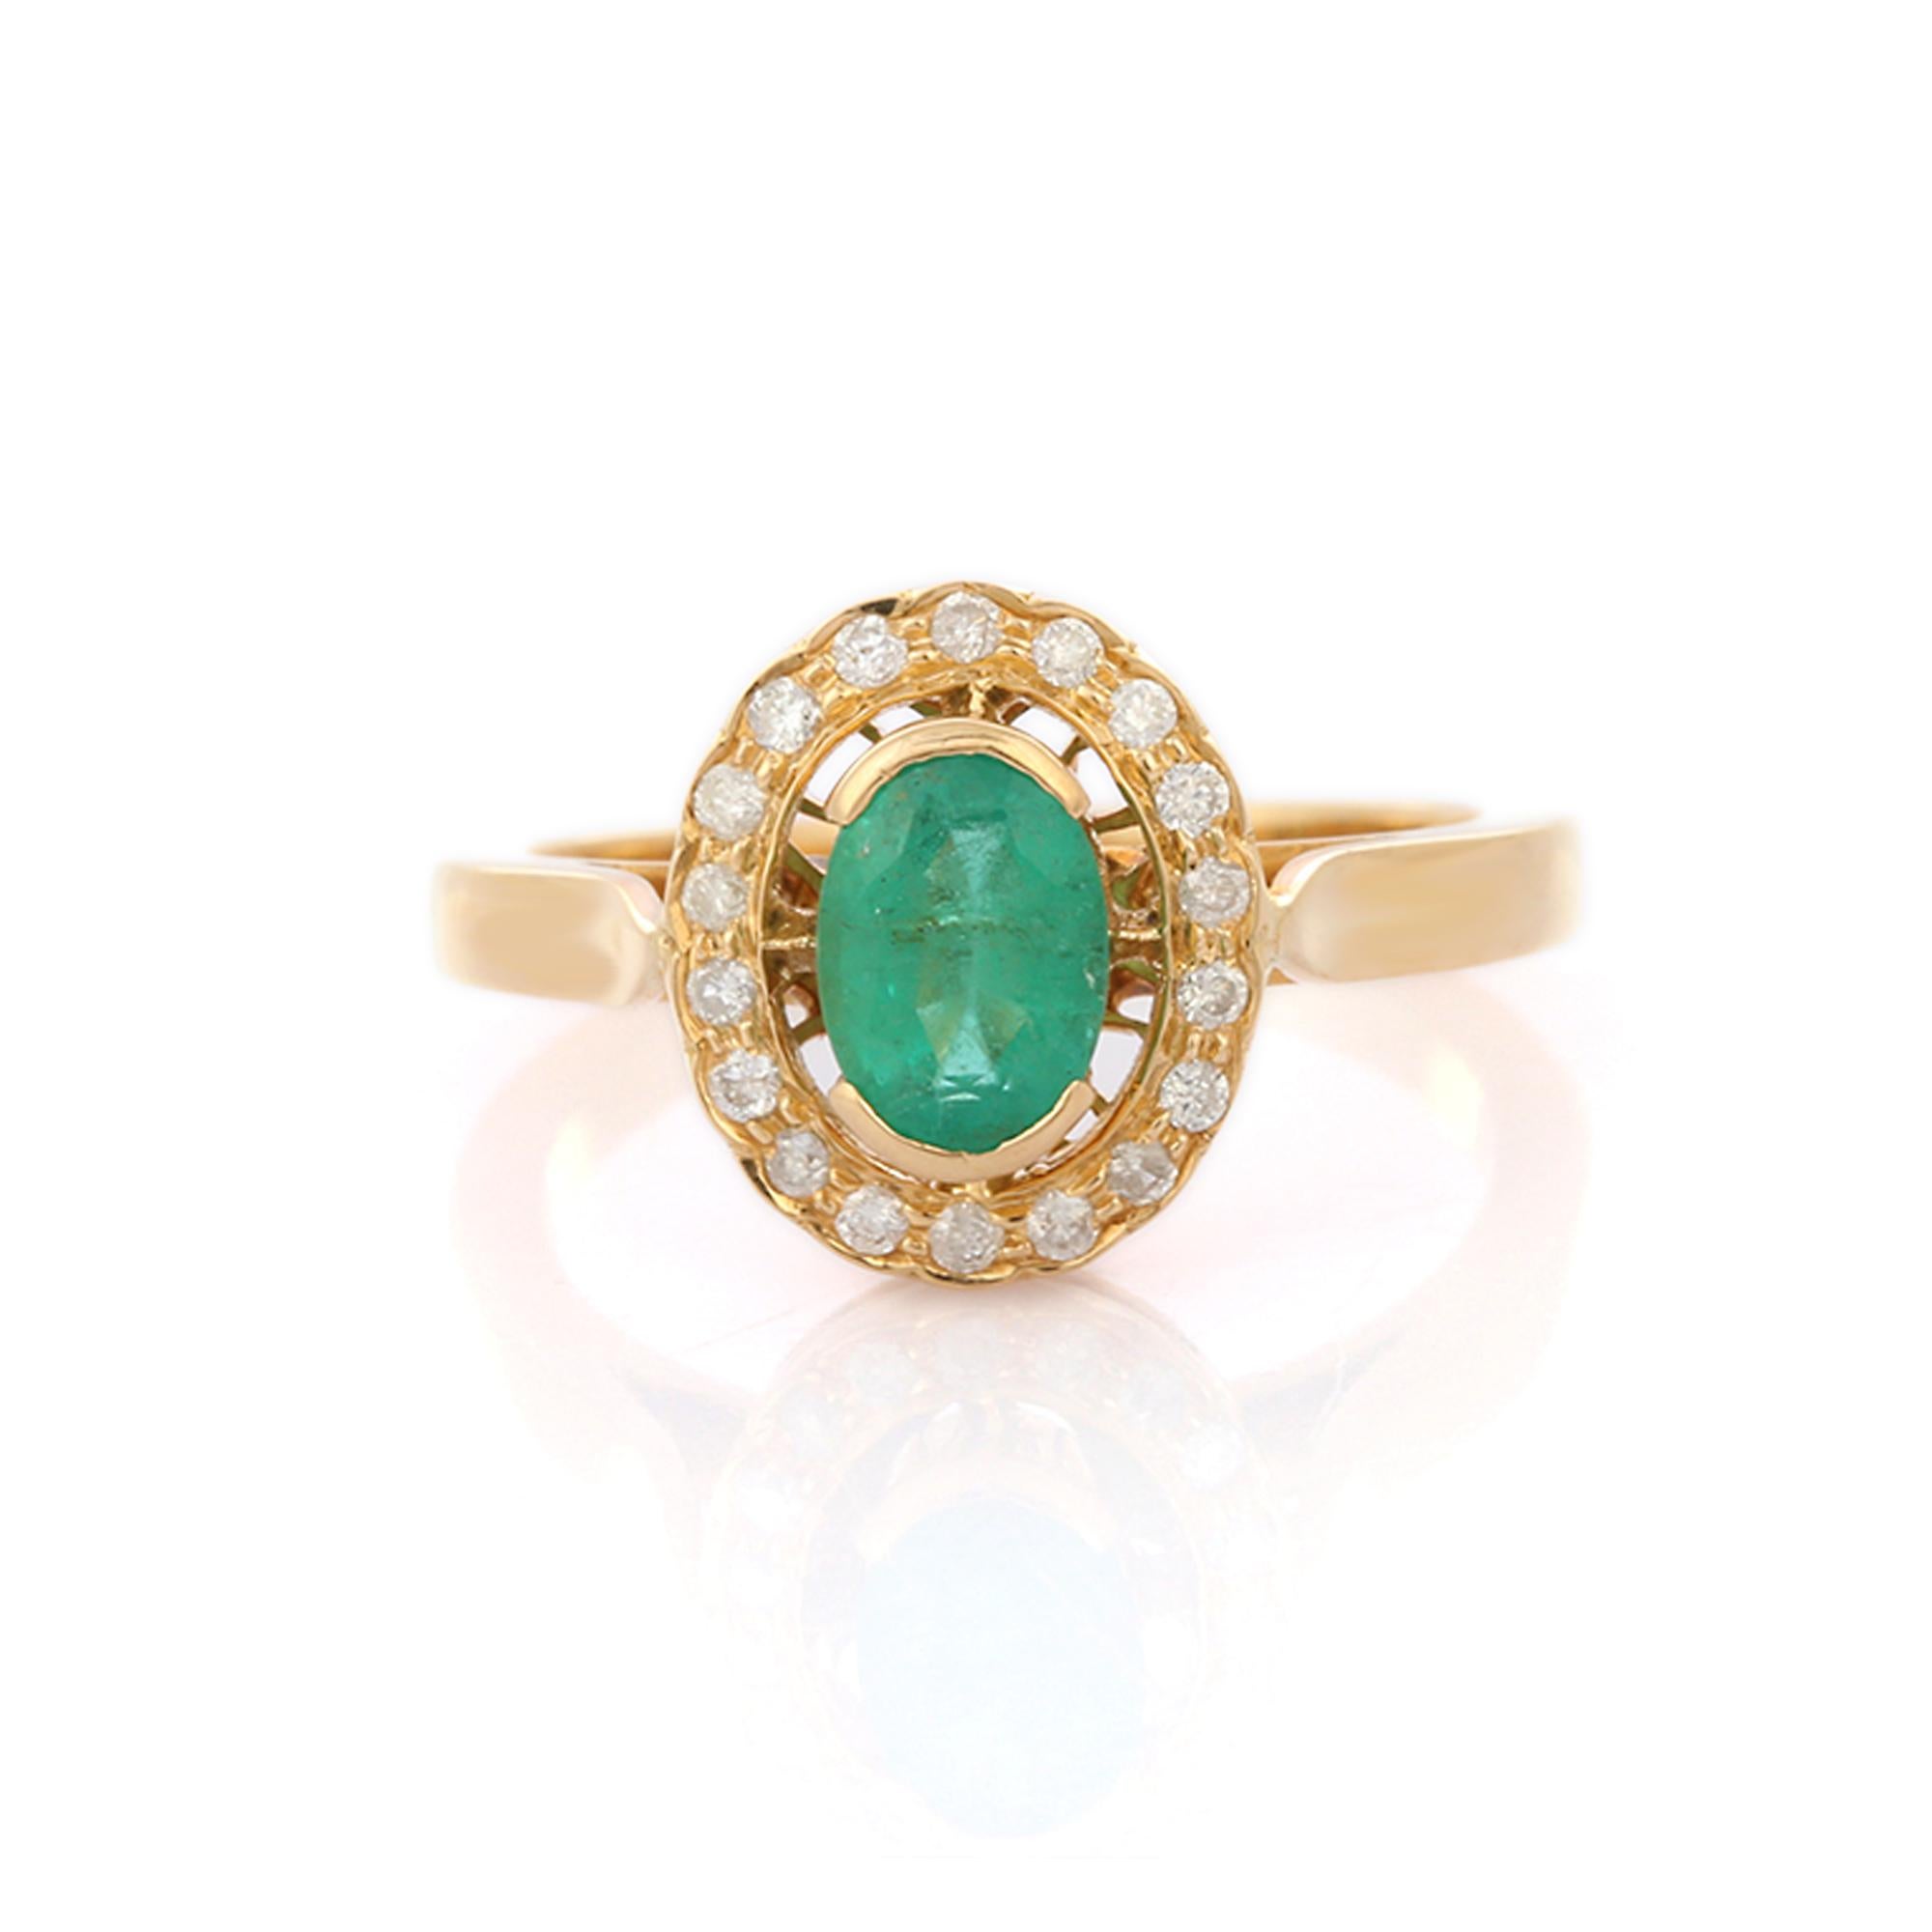 For Sale:  Contemporary Half Bezel Set Emerald and Halo Diamond Ring in 18K Yellow Gold 5